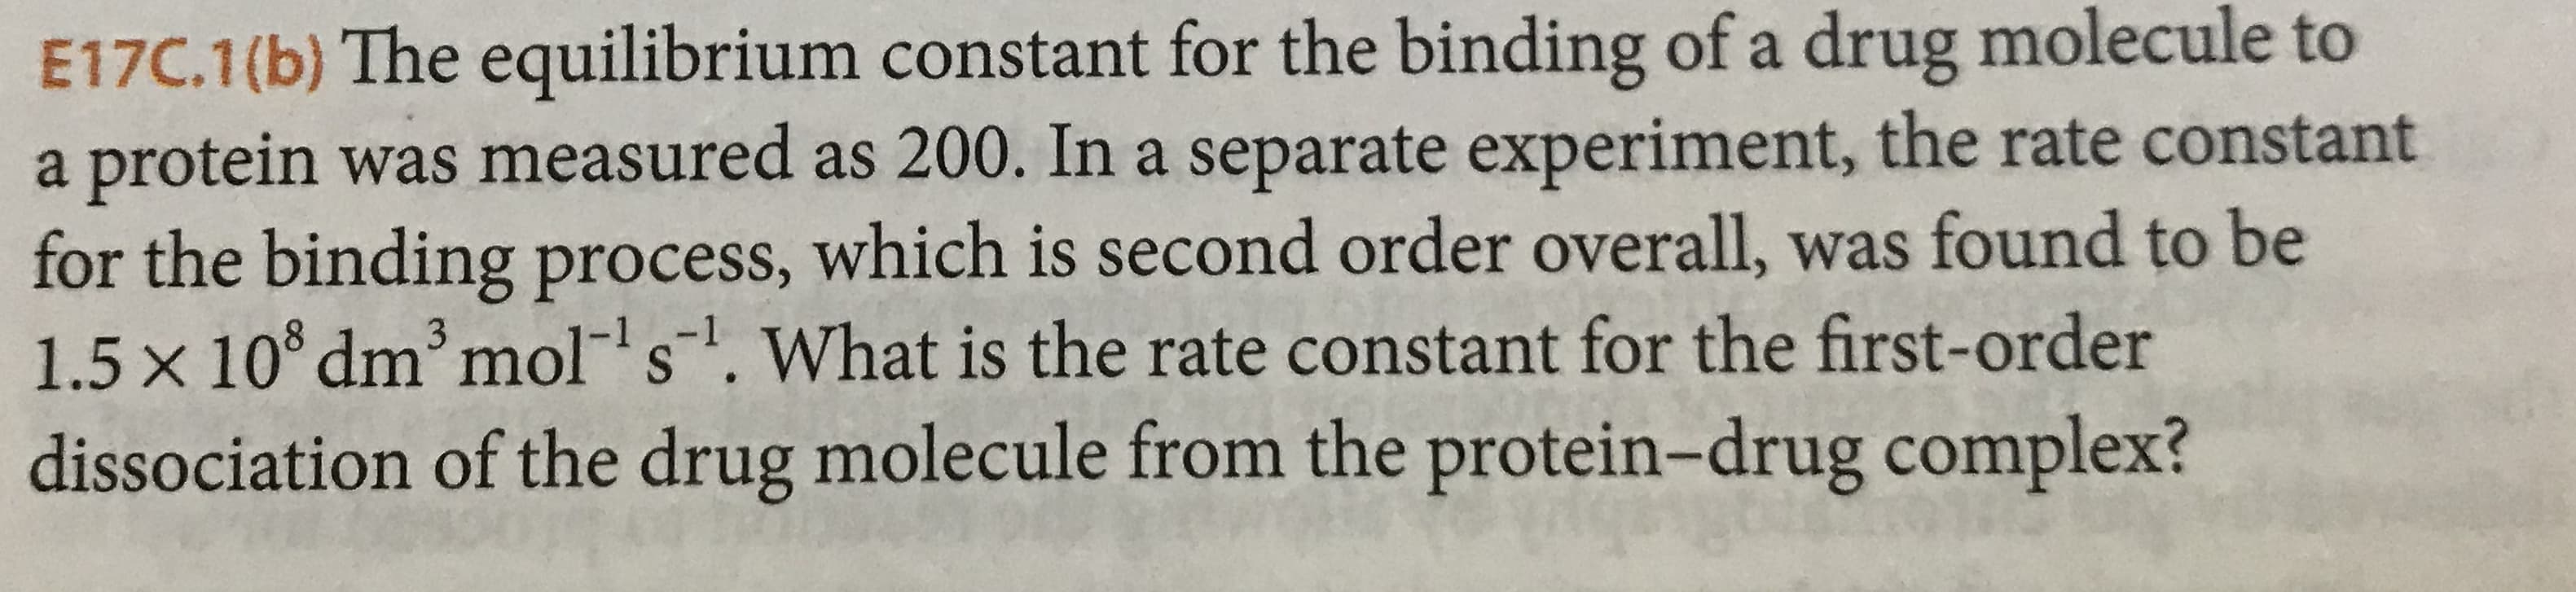 E17C.1(b) The equilibrium constant for the binding of a drug molecule to
a protein was measured as 200. In a separate experiment, the rate constant
for the binding process, which is second order overall, was found to be
1.5 x 10 dm mol s. What is the rate constant for the first-order
dissociation of the drug molecule from the protein- drug complex?
